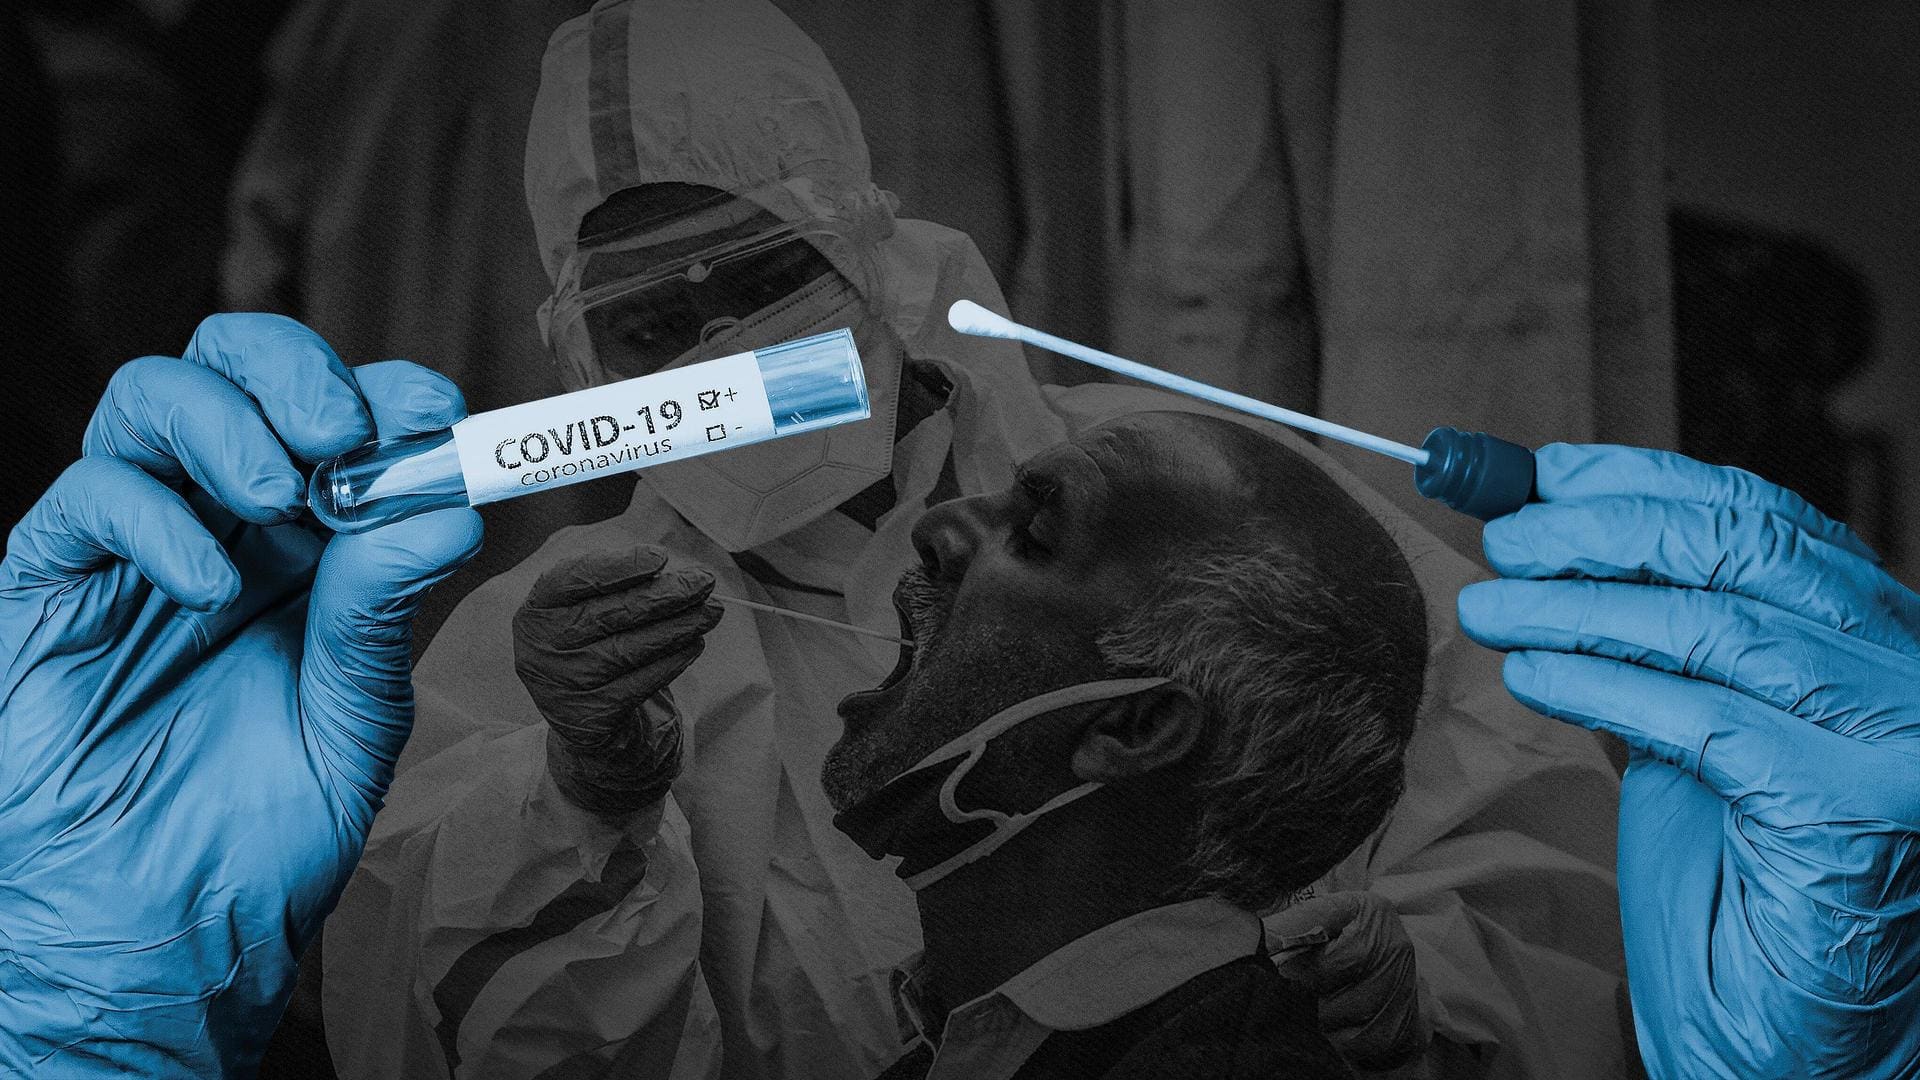 COVID-19: India registers 1,331 new cases, 15 deaths